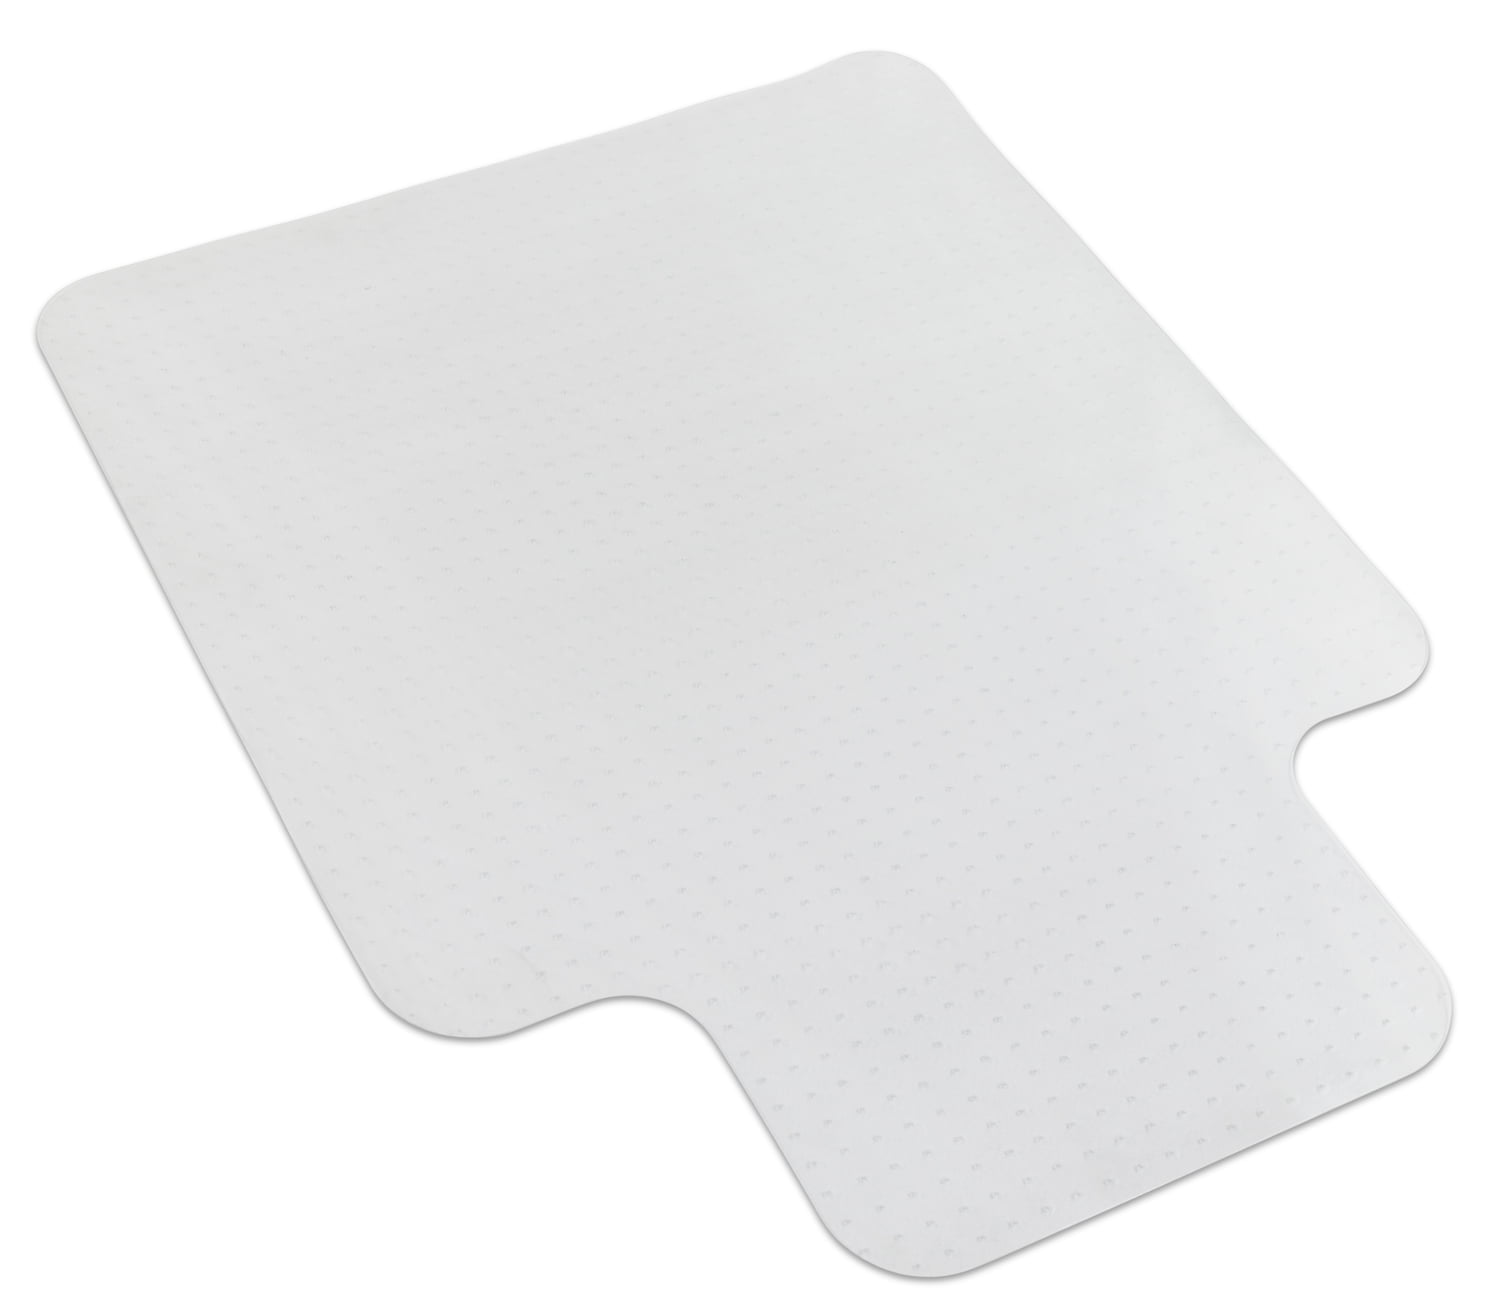 FHSTSWE Office Chair Mat for Carpet with Grippers The Protector of Your Carpet in Home and Office 47 x 36 Easy Glide for Rolling Chairs with Lip 